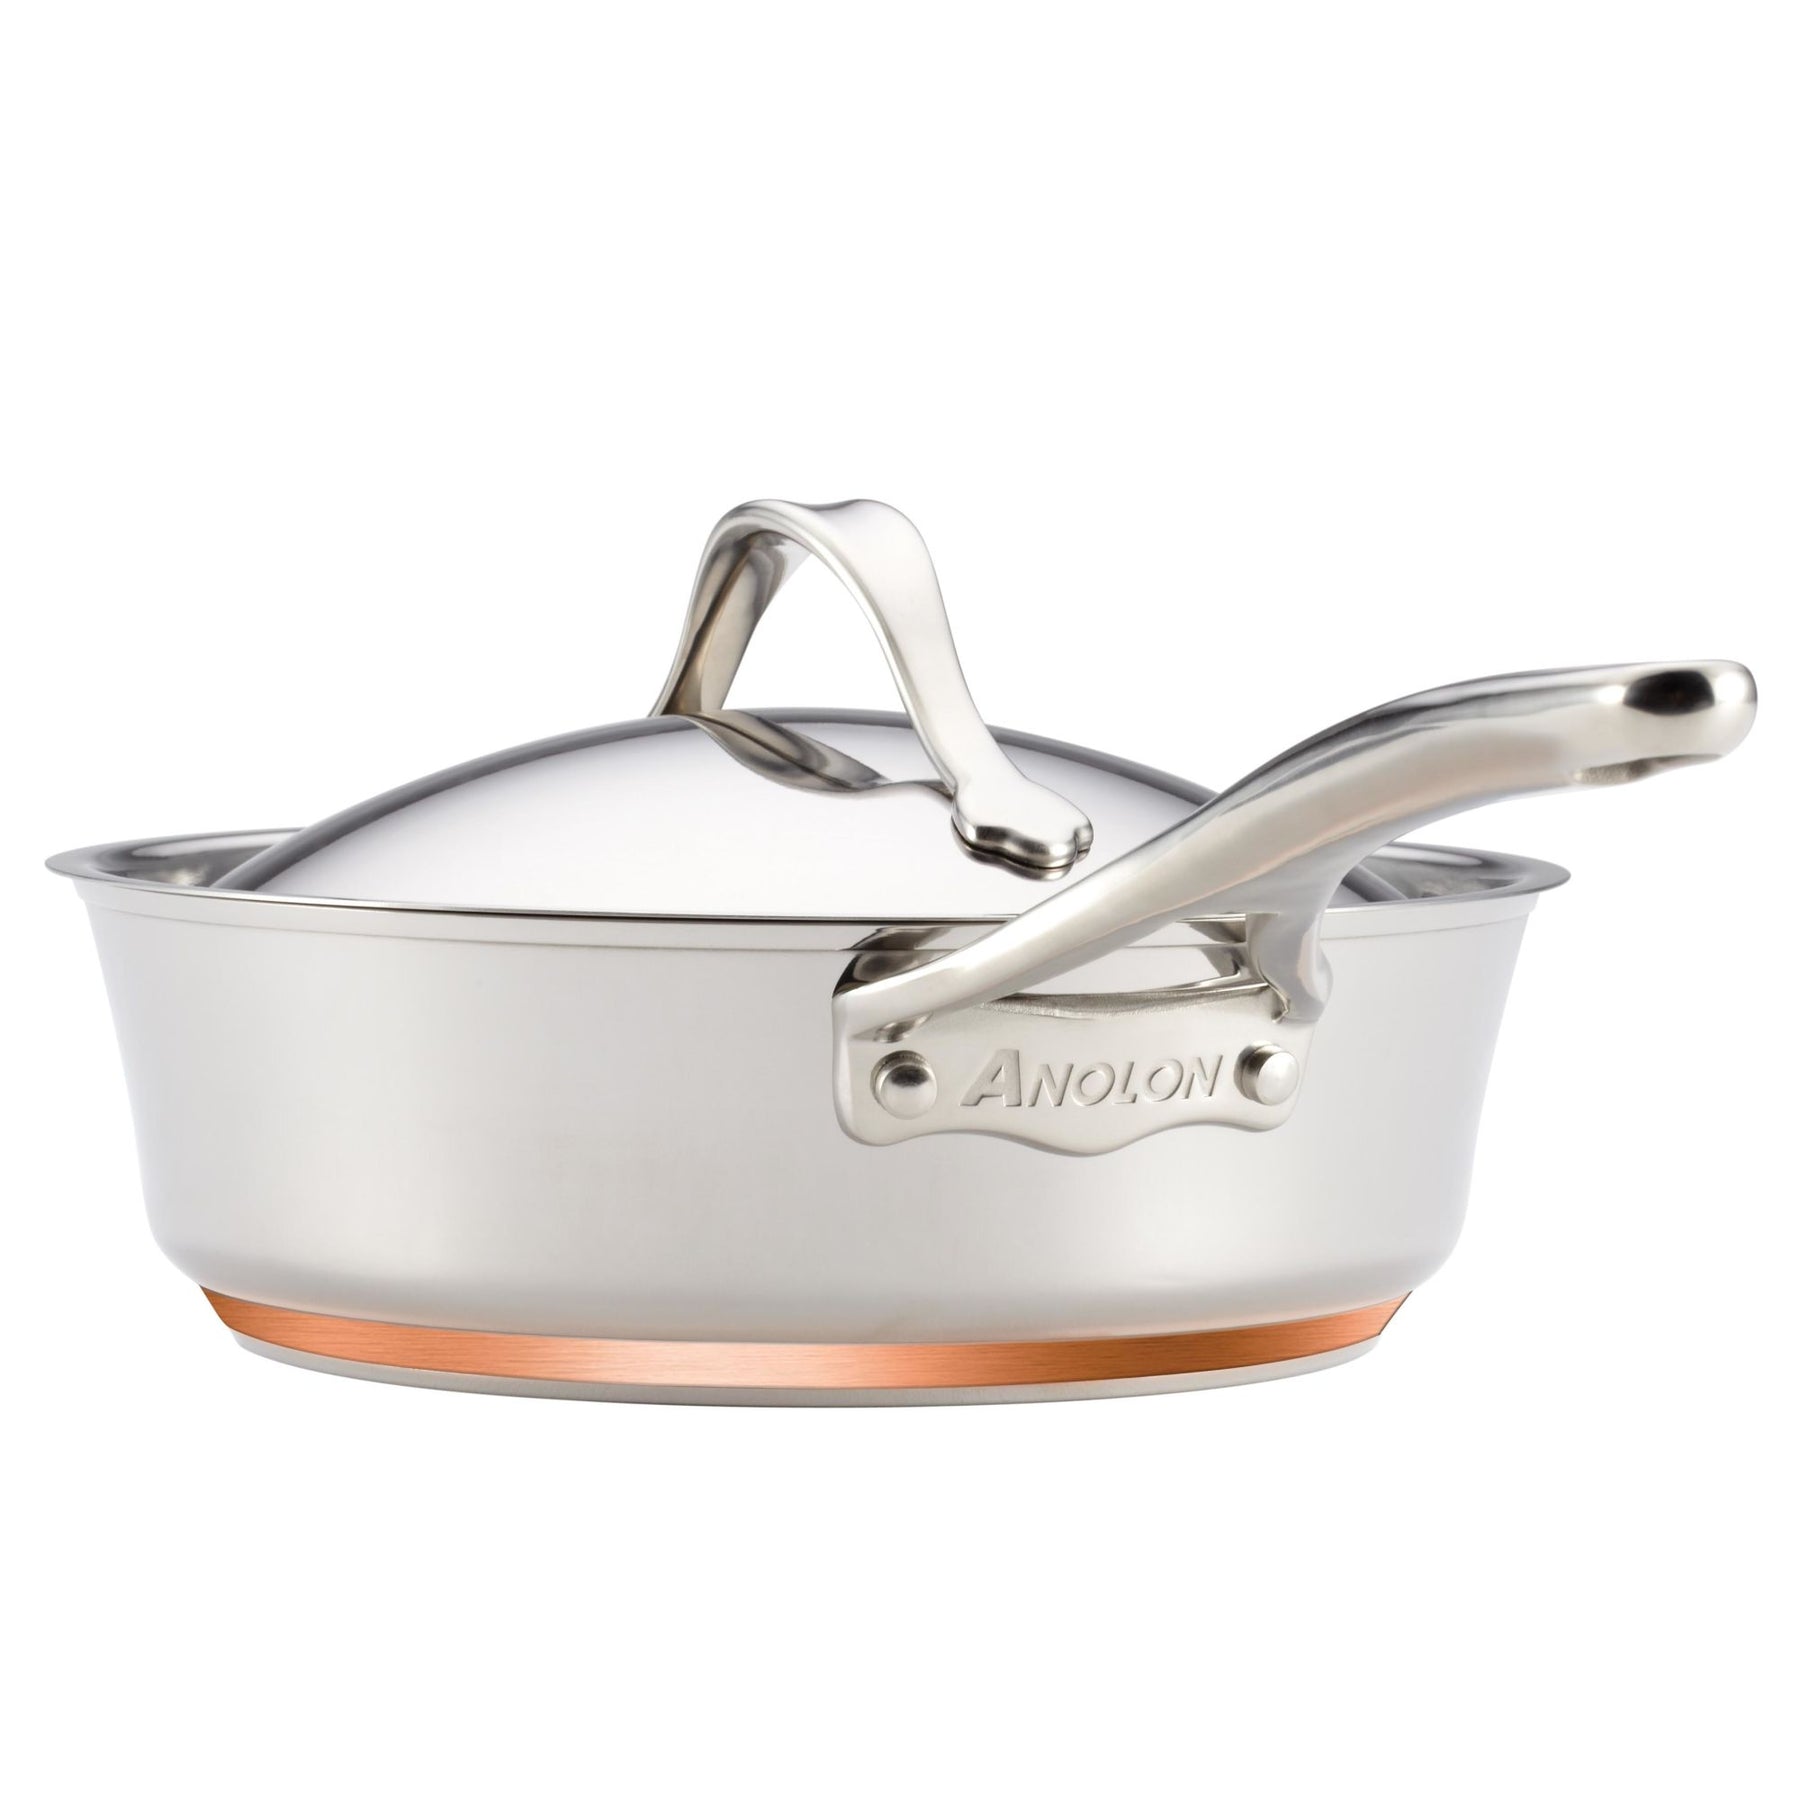 Anolon Nouvelle Copper Stainless Steel Cookware Set - So Olive